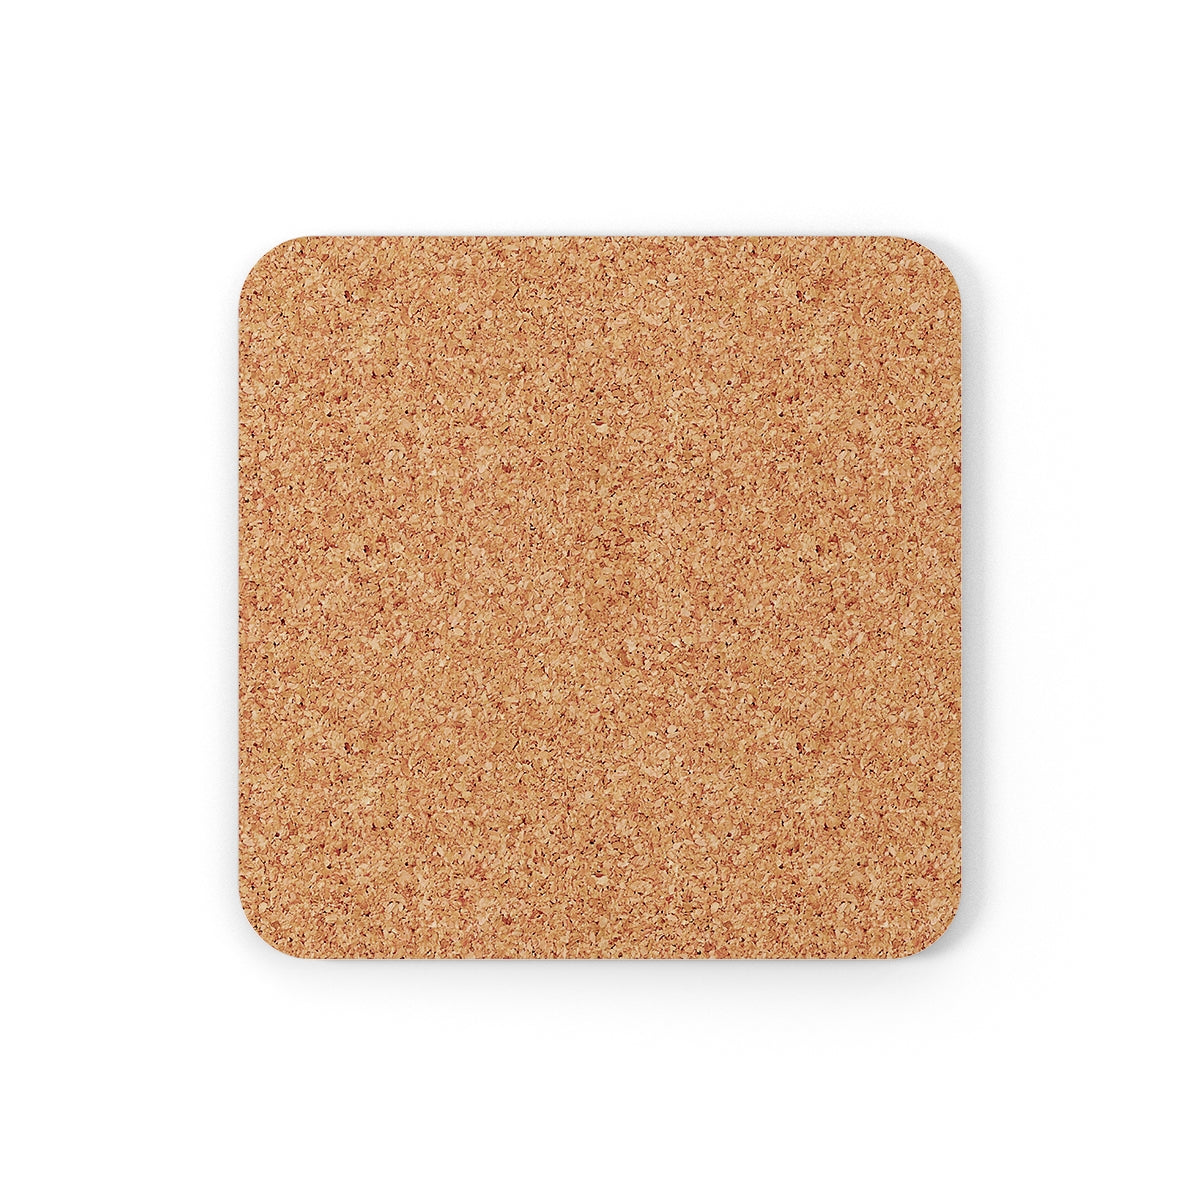 Too Early for a Drink? Corkwood Coaster Set of 4